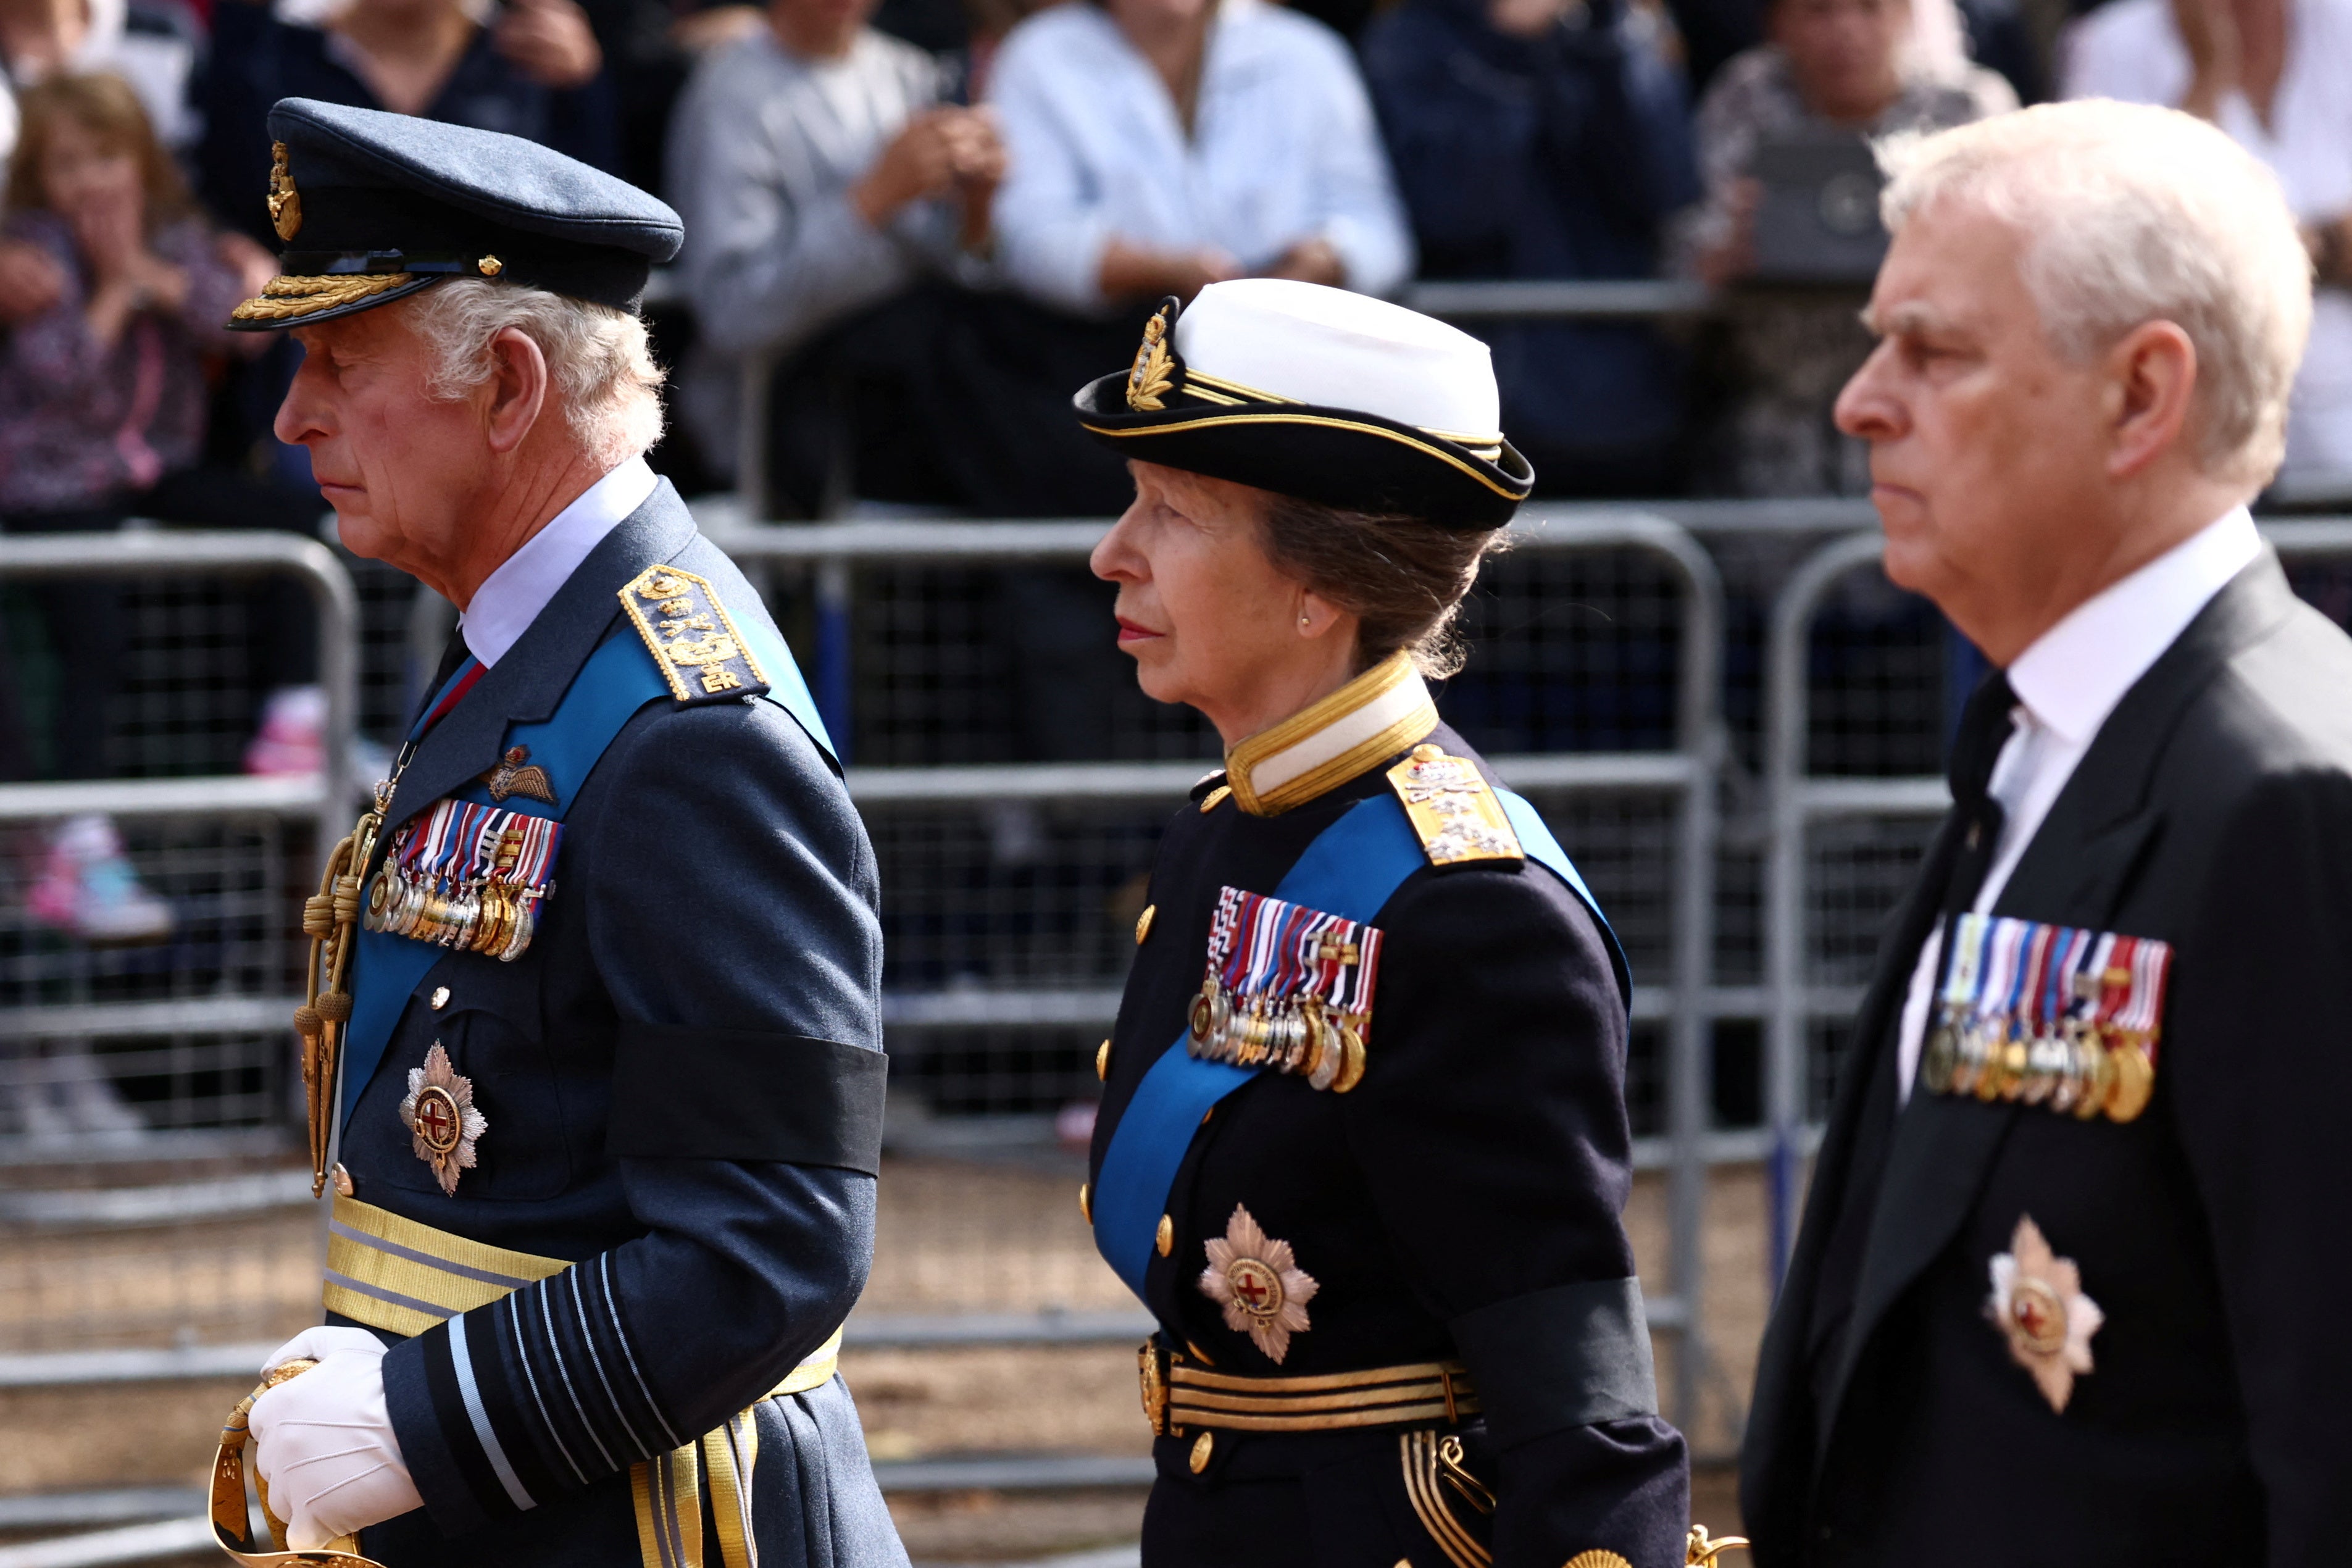 King Charles III and members of the royal family follow the coffin of Queen Elizabeth II (Henry Nicholls/PA).